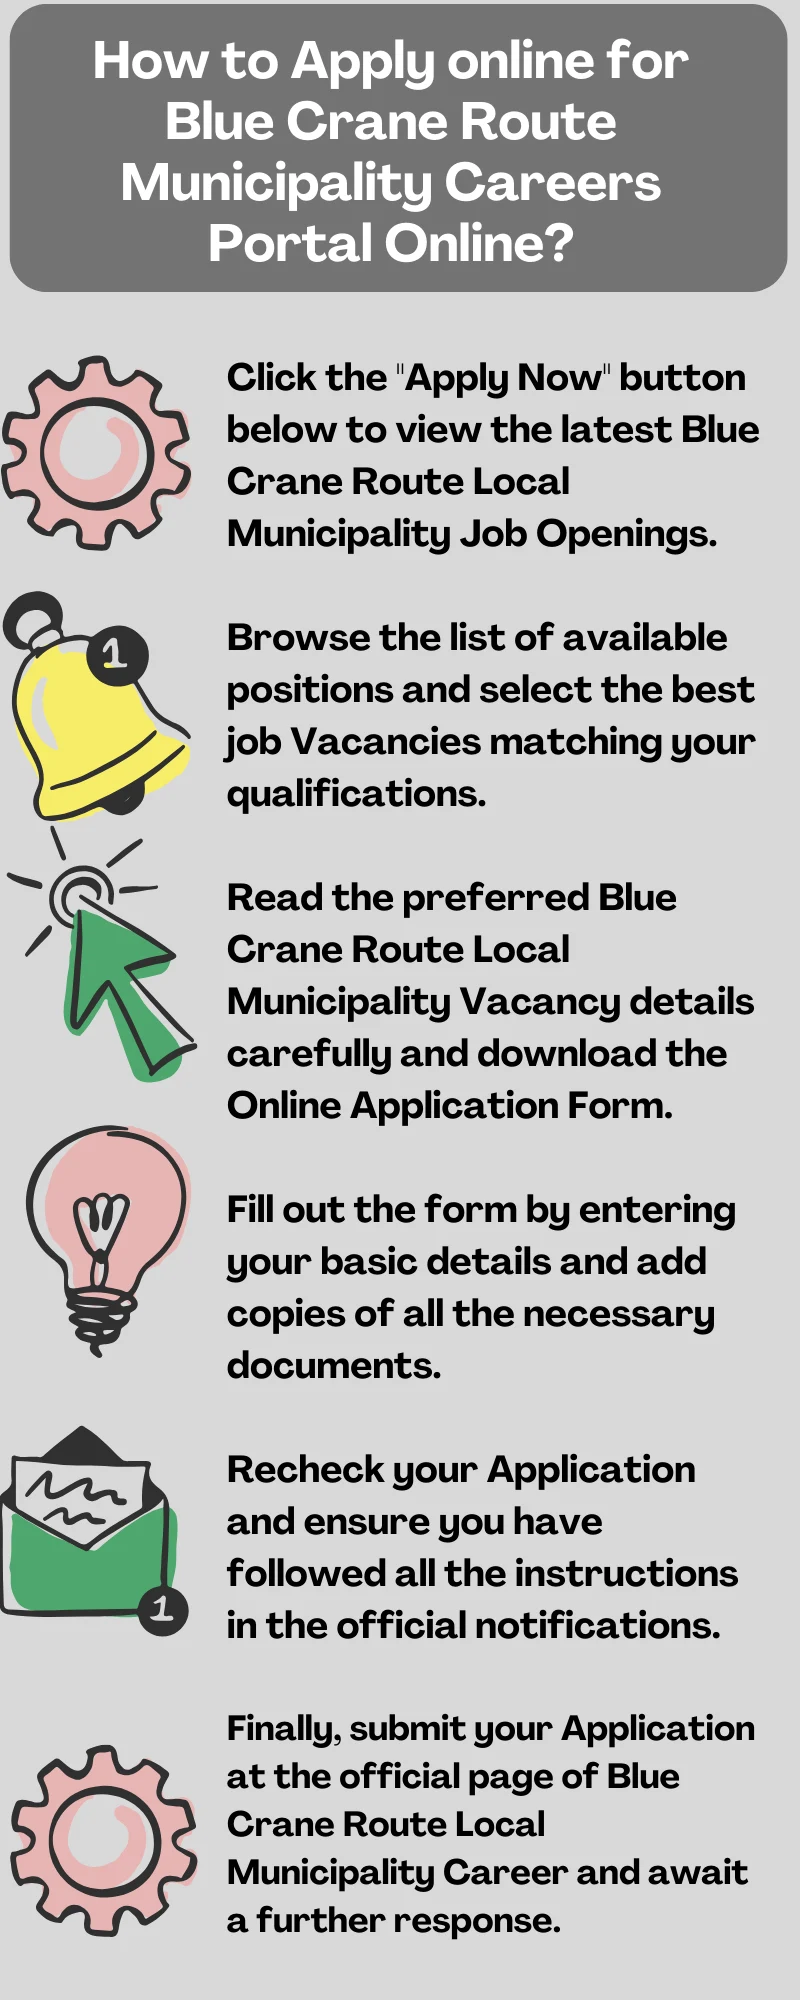 How to Apply online for Blue Crane Route Municipality Careers Portal Online?